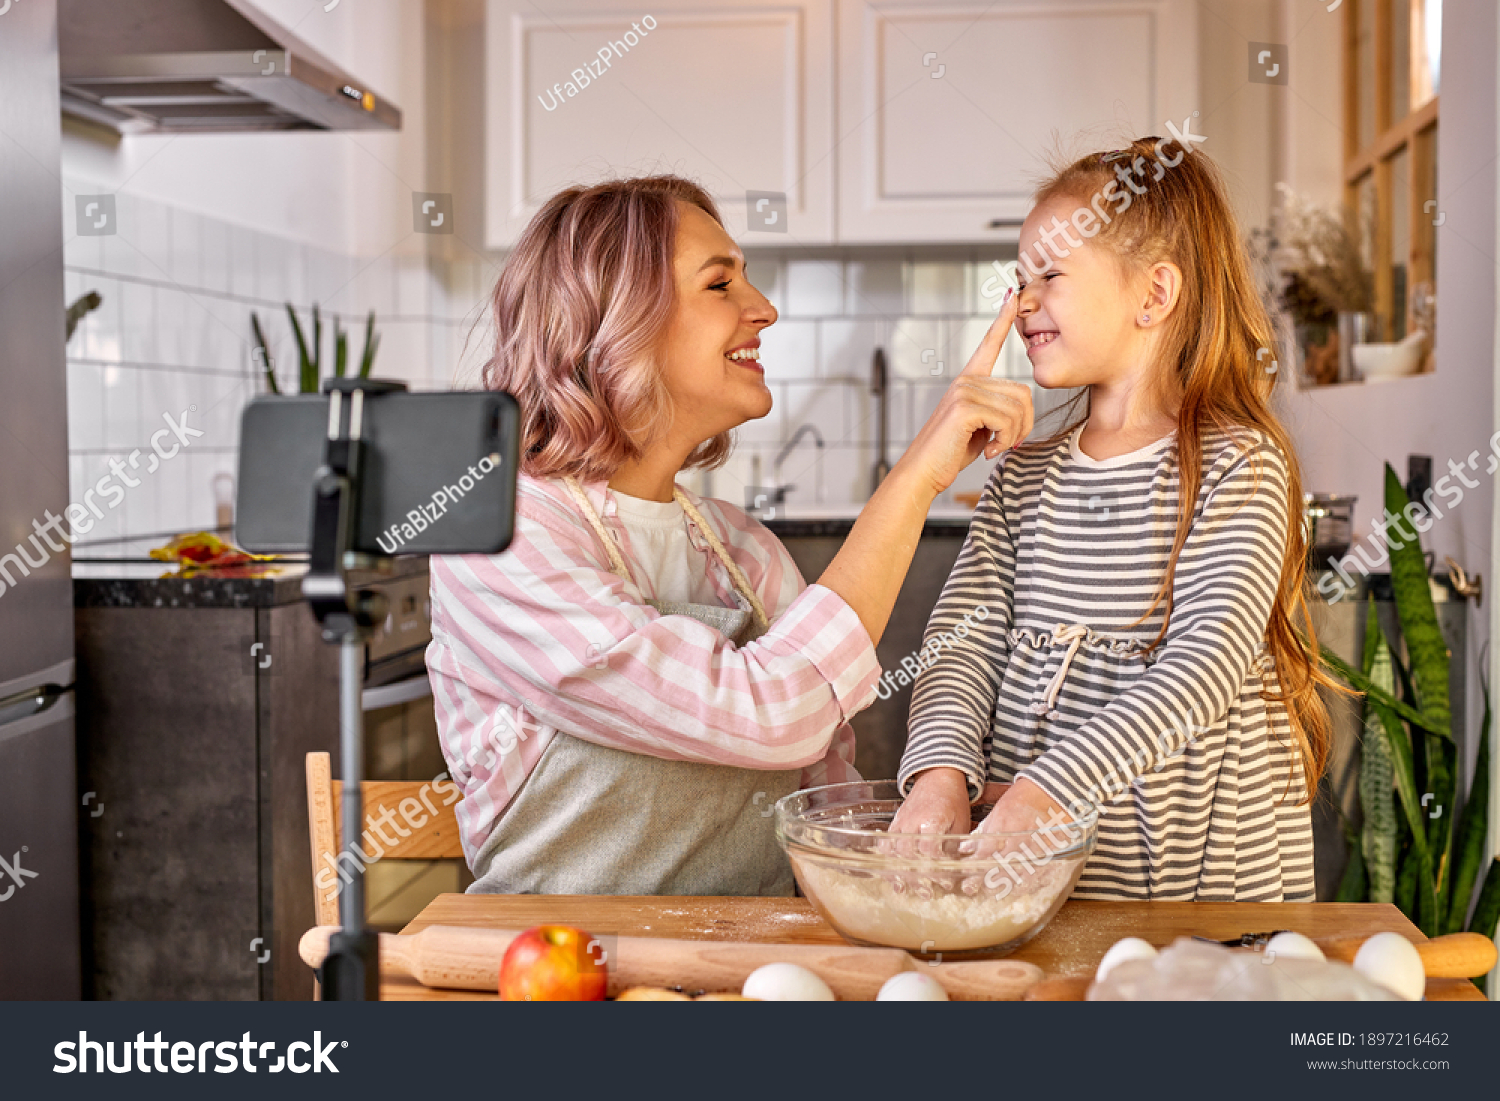 mother food blogger records the process of cooking with daughter on smartphone's camera, they have fun, talk, enjoy preparing food together #1897216462